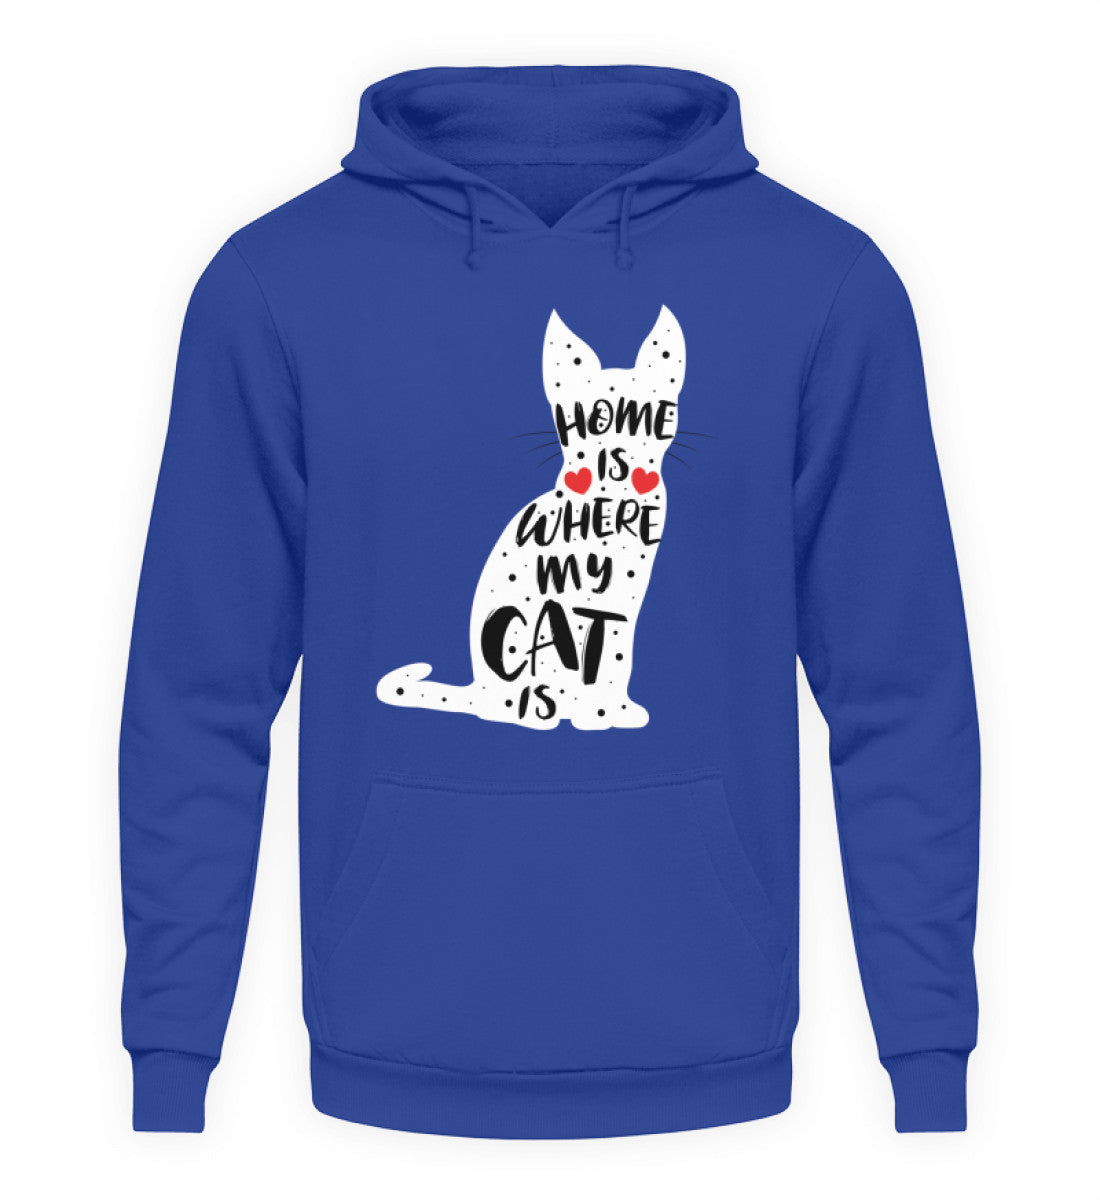 Zeigt home is where my cat is unisex kapuzenpullover hoodie in Farbe Magenta Magic